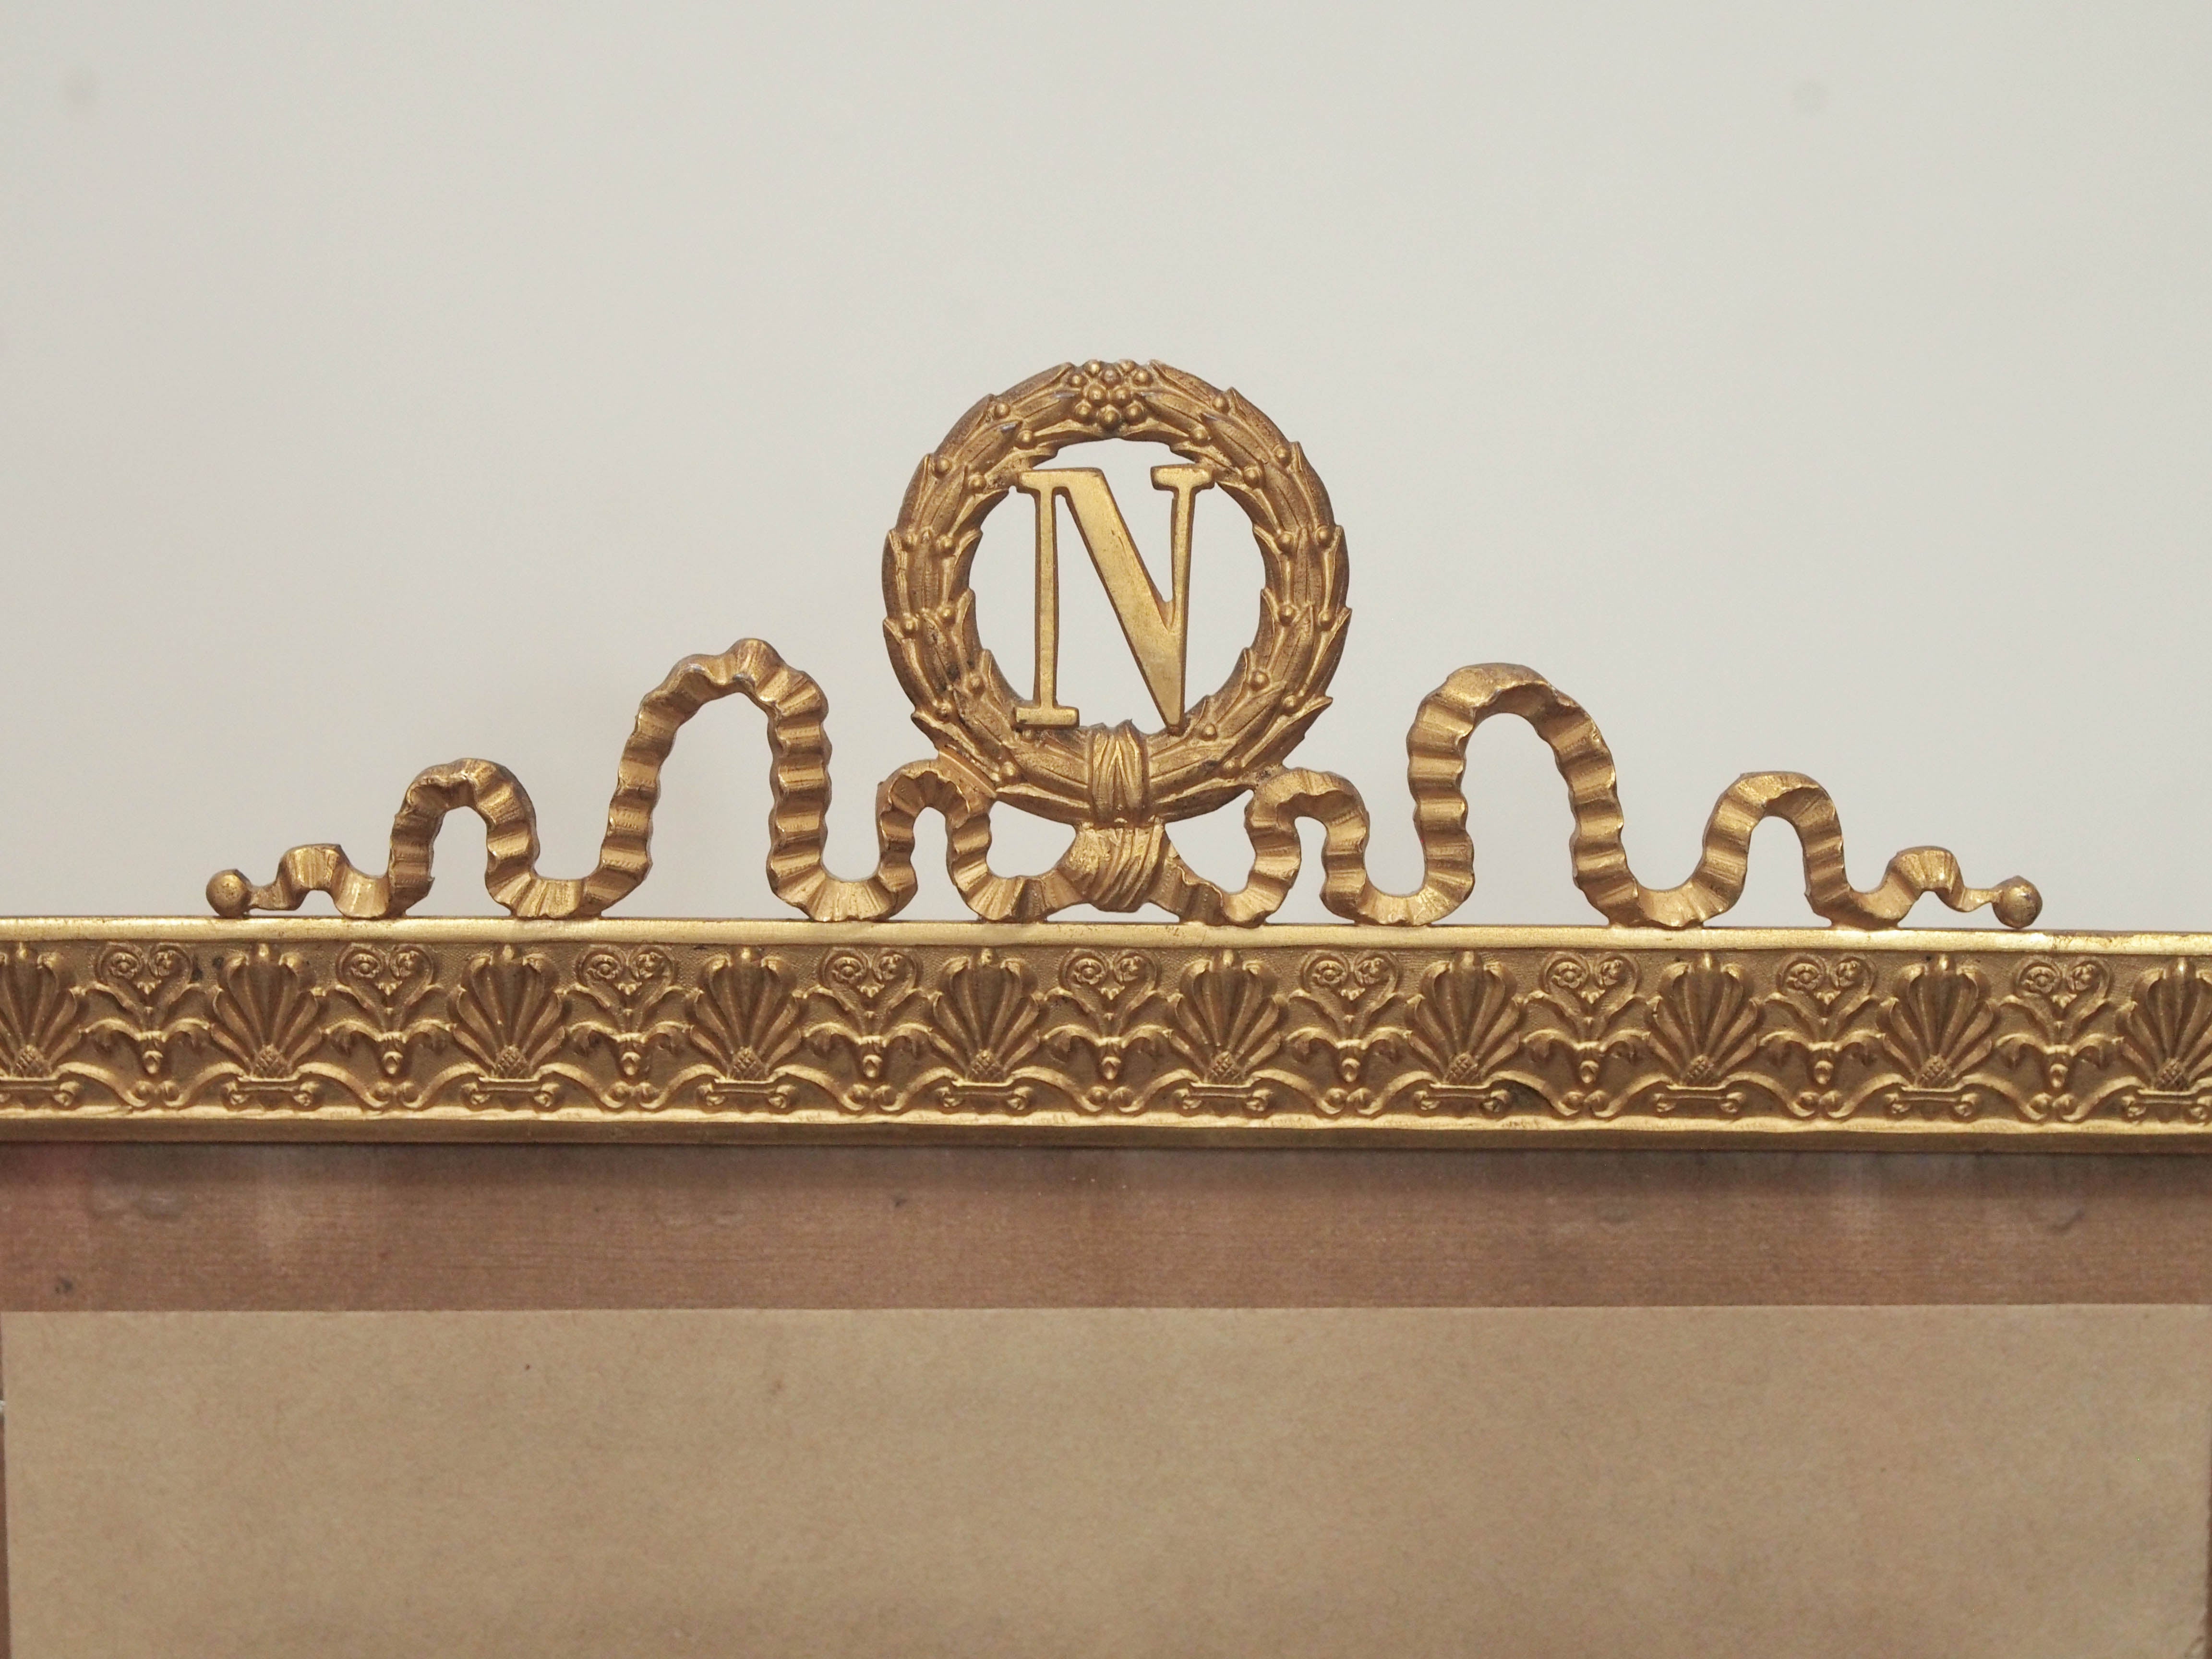 French Napoleonic Gilt Bronze Frame circa 1900 having a patterned frame and crested by a ribboned laurel wreath surrounding the Napoleonic N Crest.